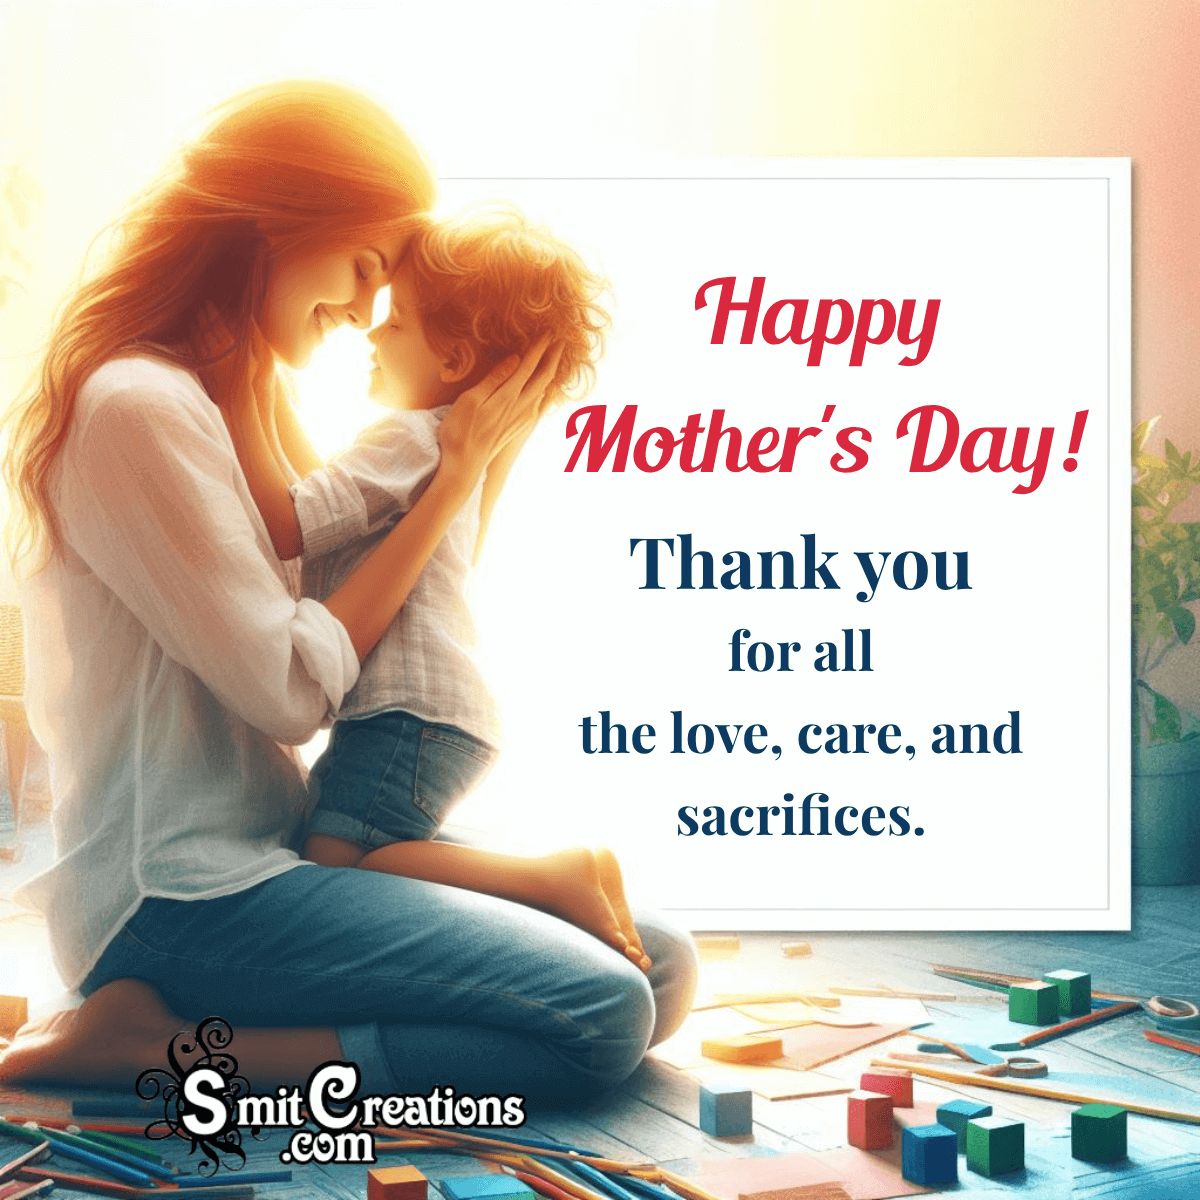 Wonderful Mother’s Day Thank You Image